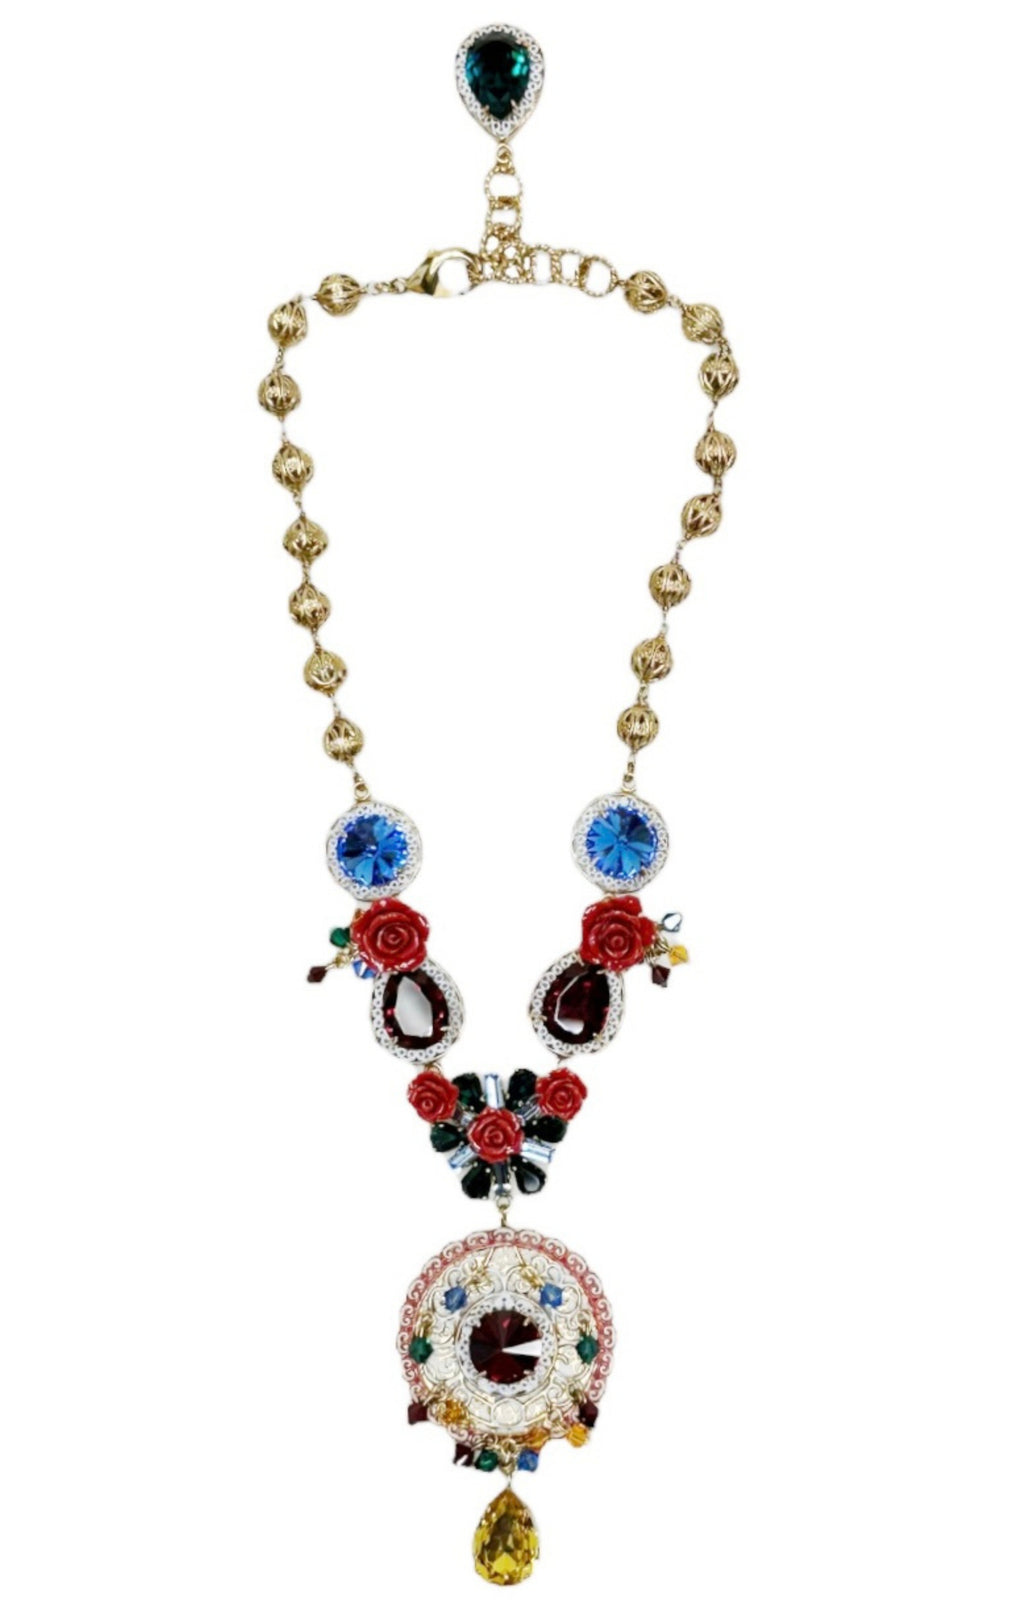 DOLCE & GABBANA (RARE & NEW) with tags Necklace Size: 22"-26" x 0.25"; Pendant: 1.625"